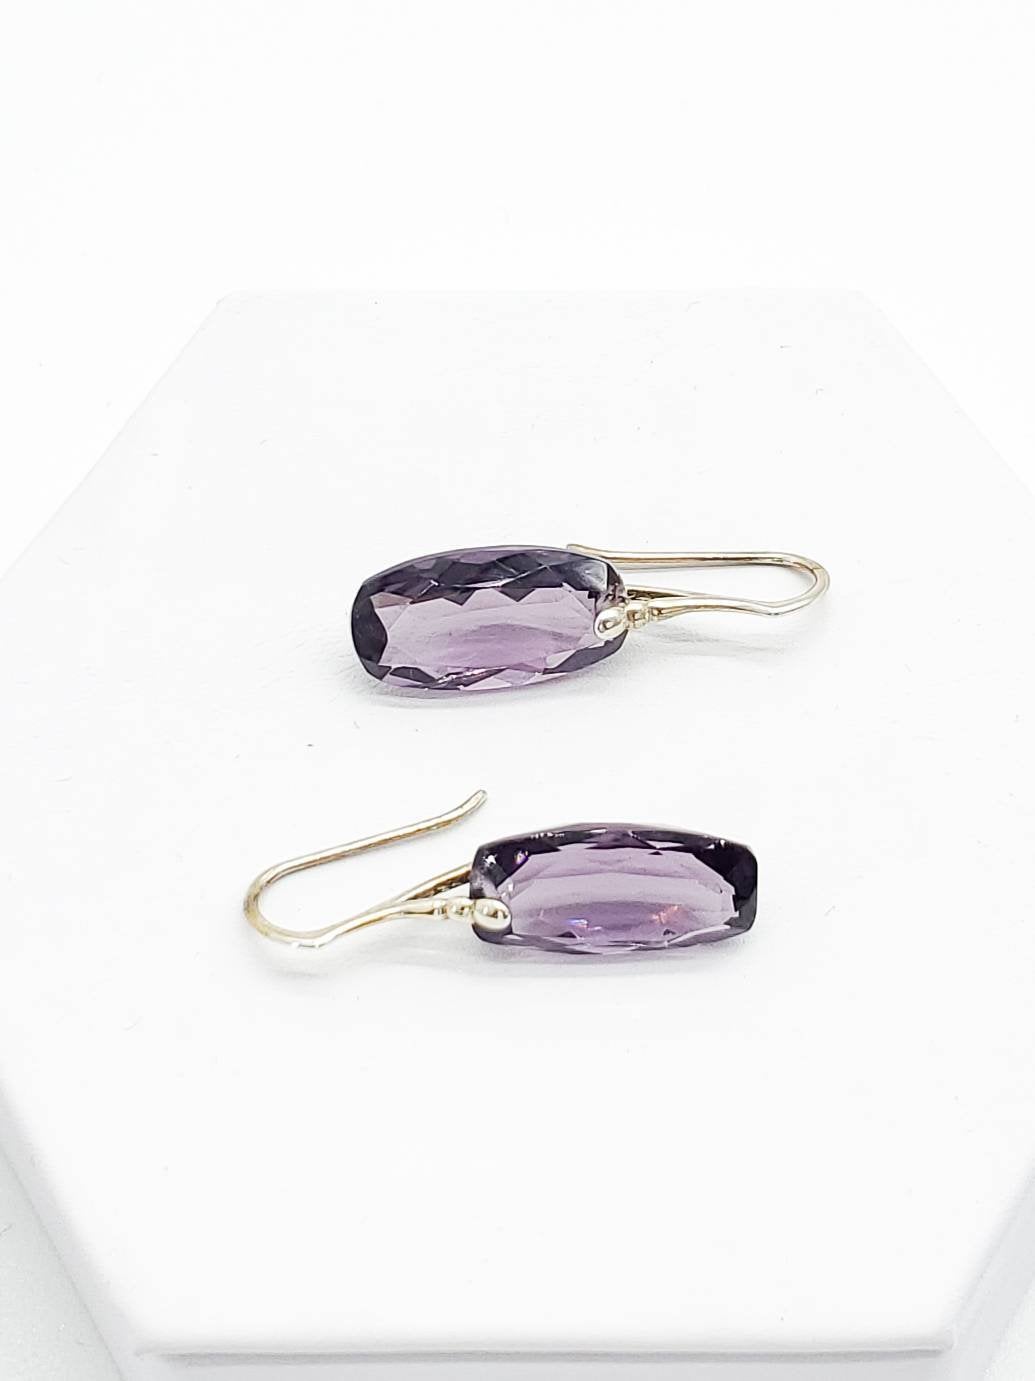 Cushion Cut Hydro Amethyst Earrings on Sterling Silver Ear Wires - The Caffeinated Raven